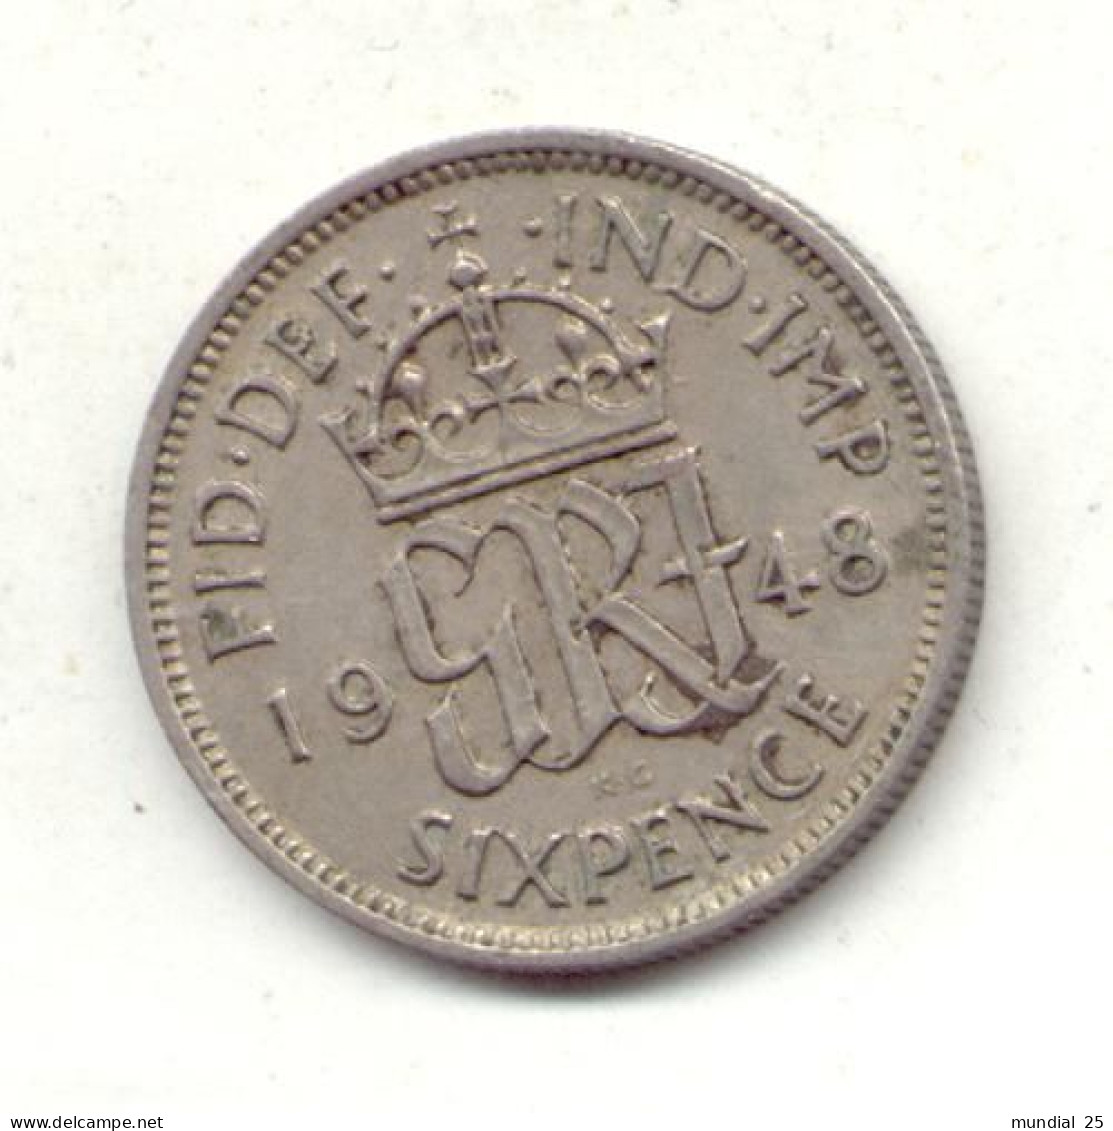 GREAT BRITAIN 6 PENCE 1948 - H. 6 Pence